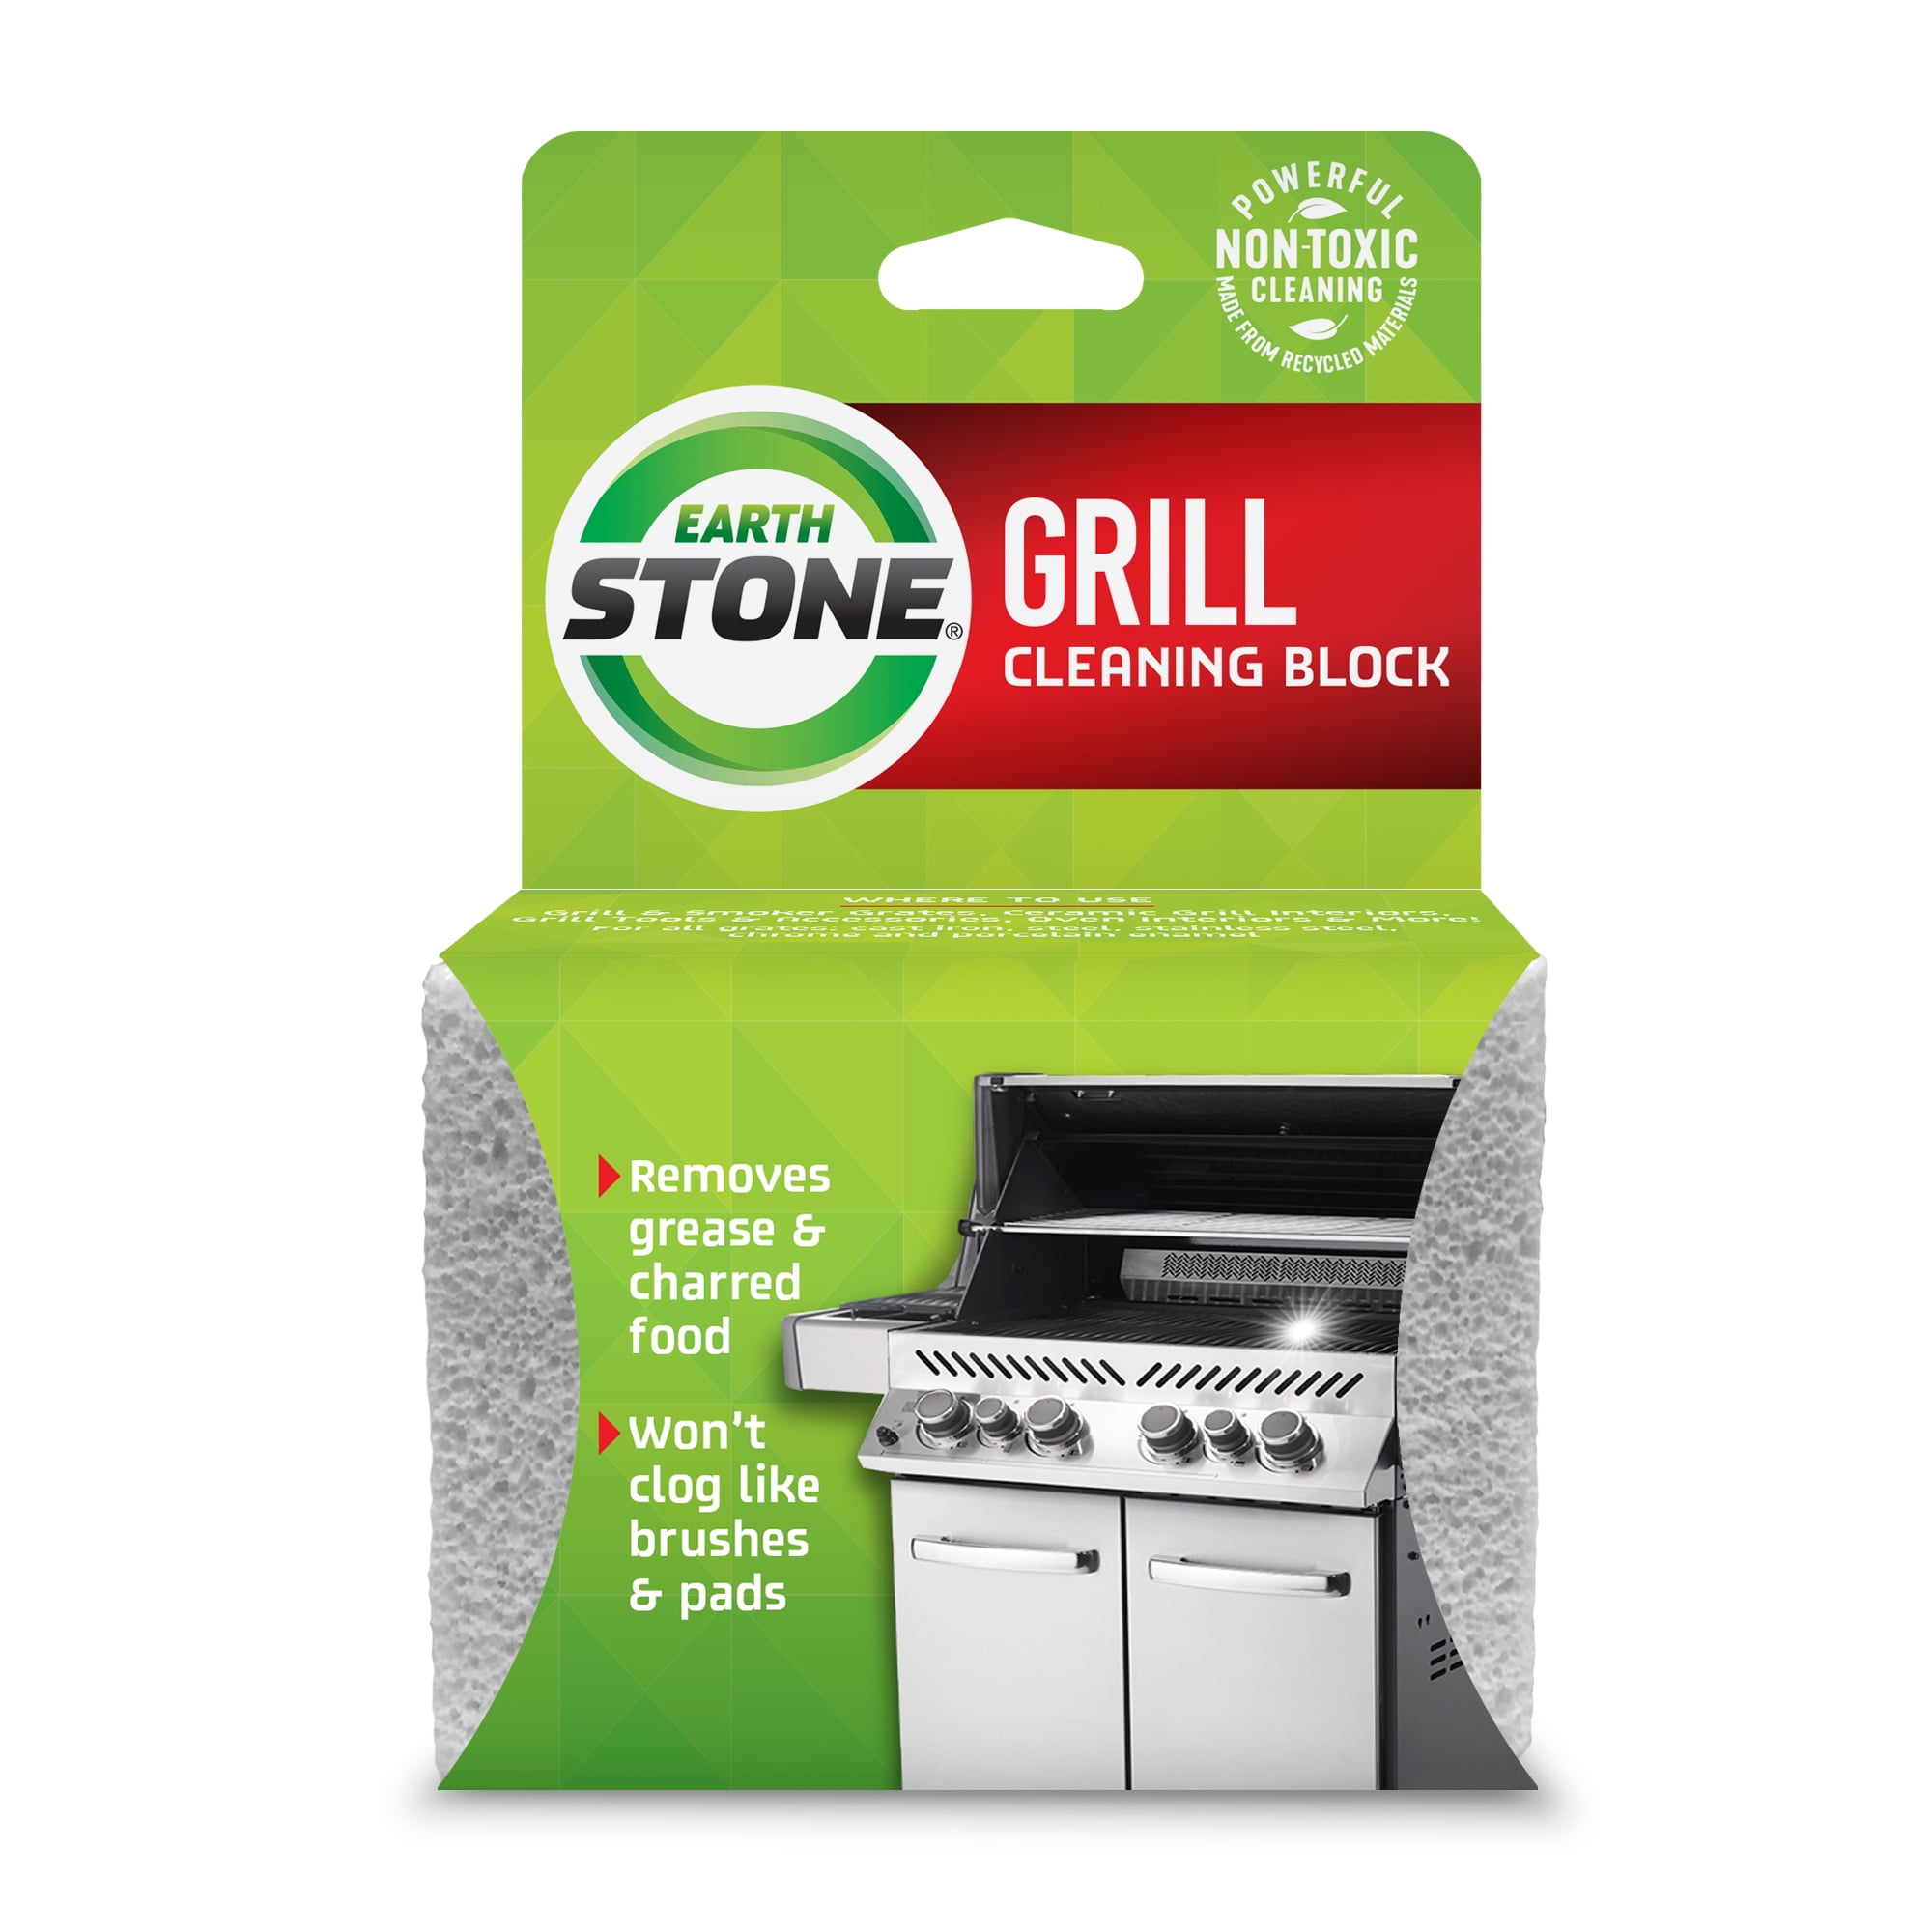 Earthstone Grill Cleaning Block